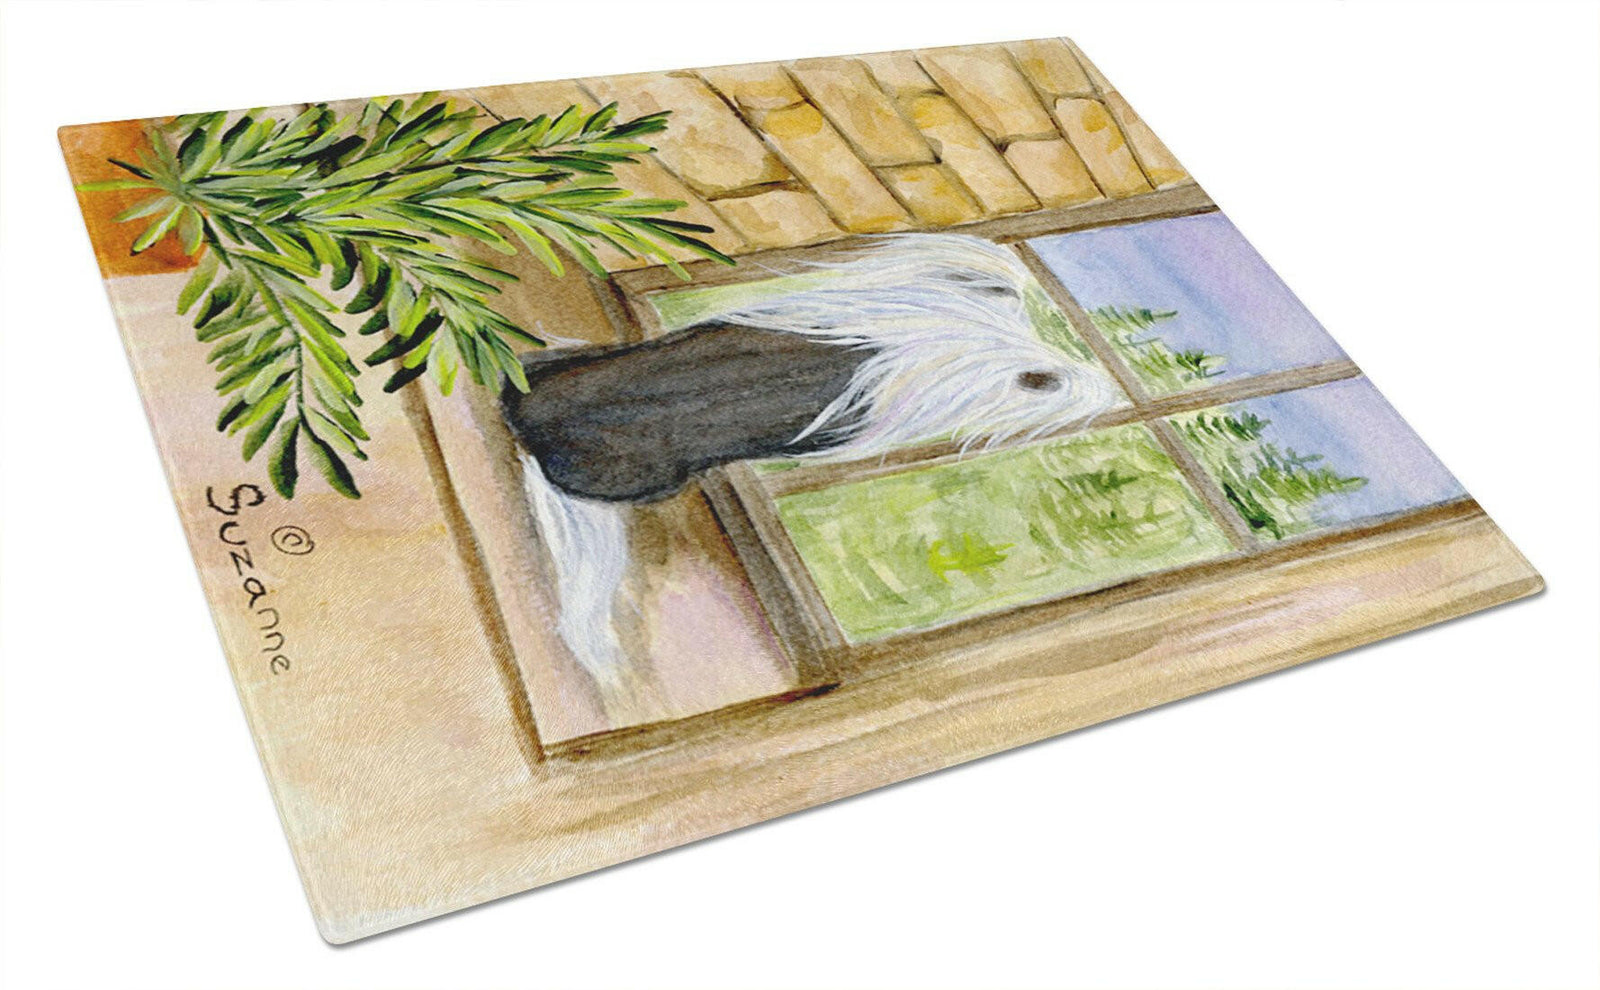 Chinese Crested Glass Cutting Board Large by Caroline's Treasures